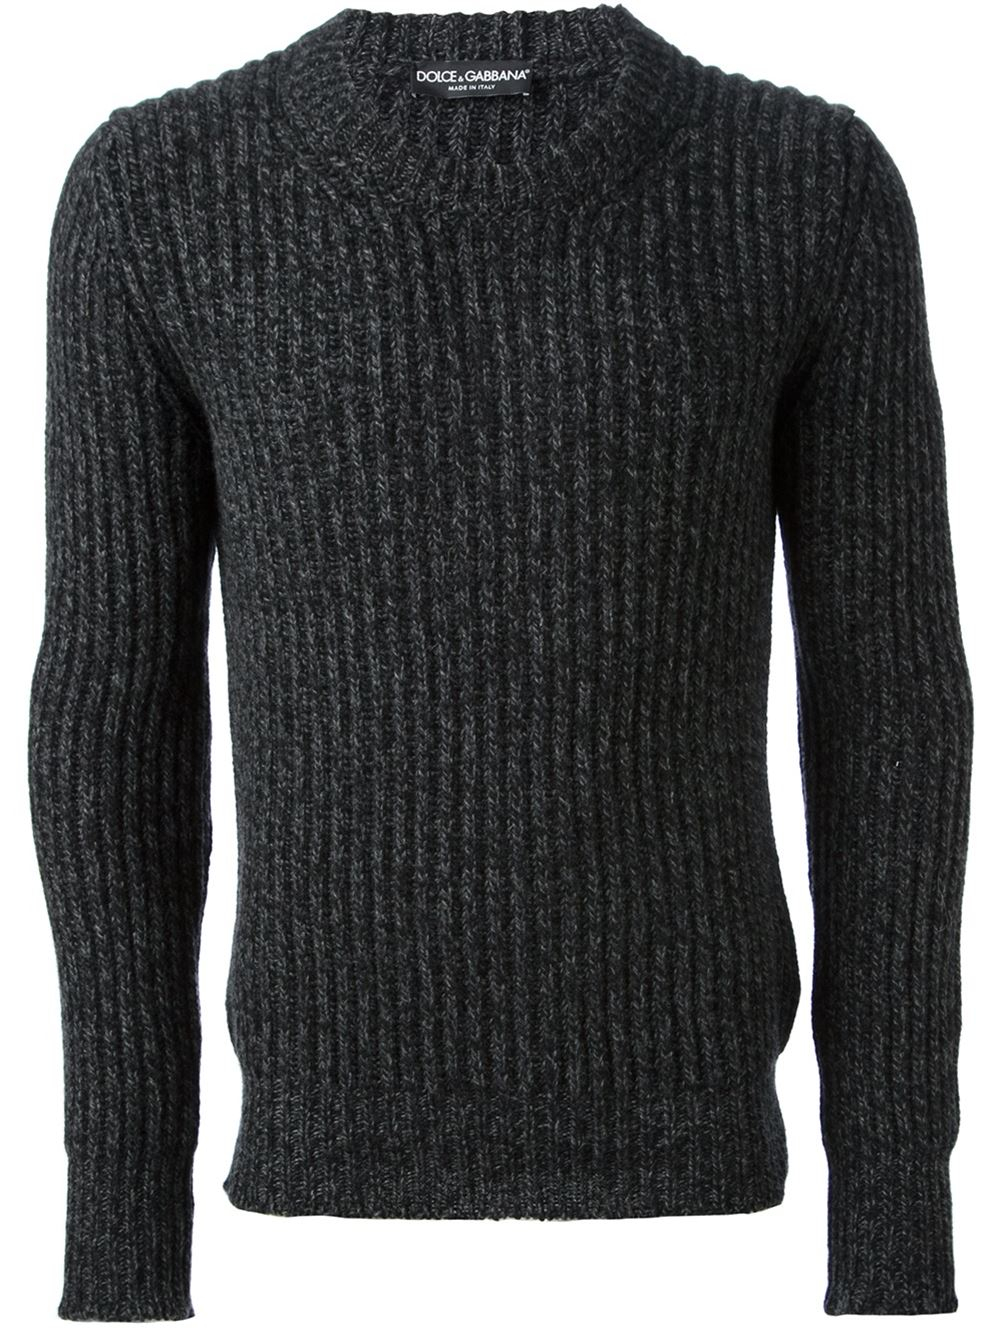 Dolce & gabbana Ribbed Knit Sweater in Gray for Men | Lyst